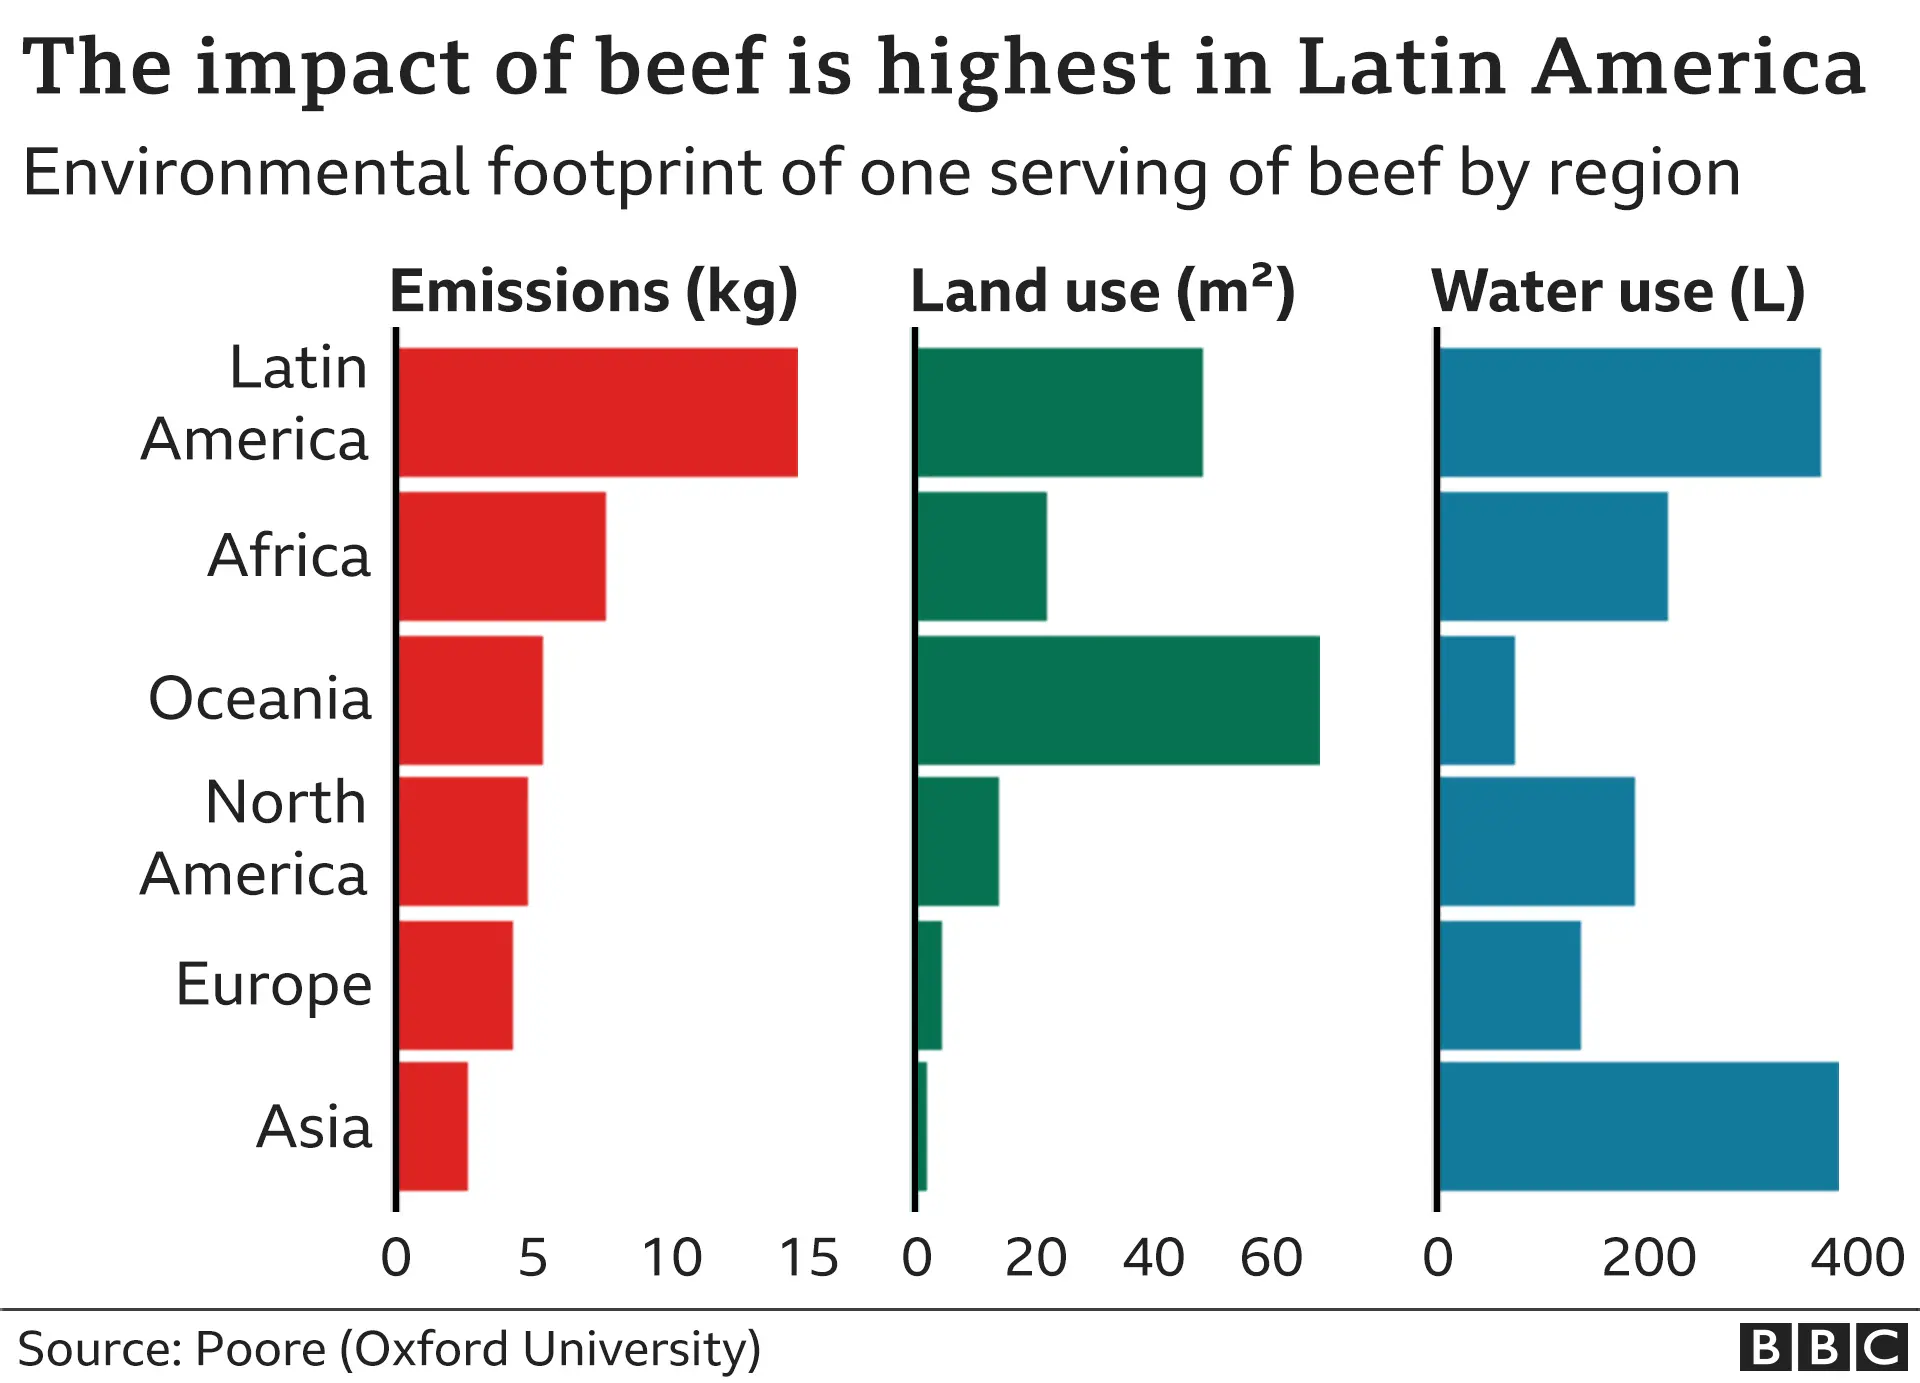 Climate change food calculator: What's your diet's carbon footprint?